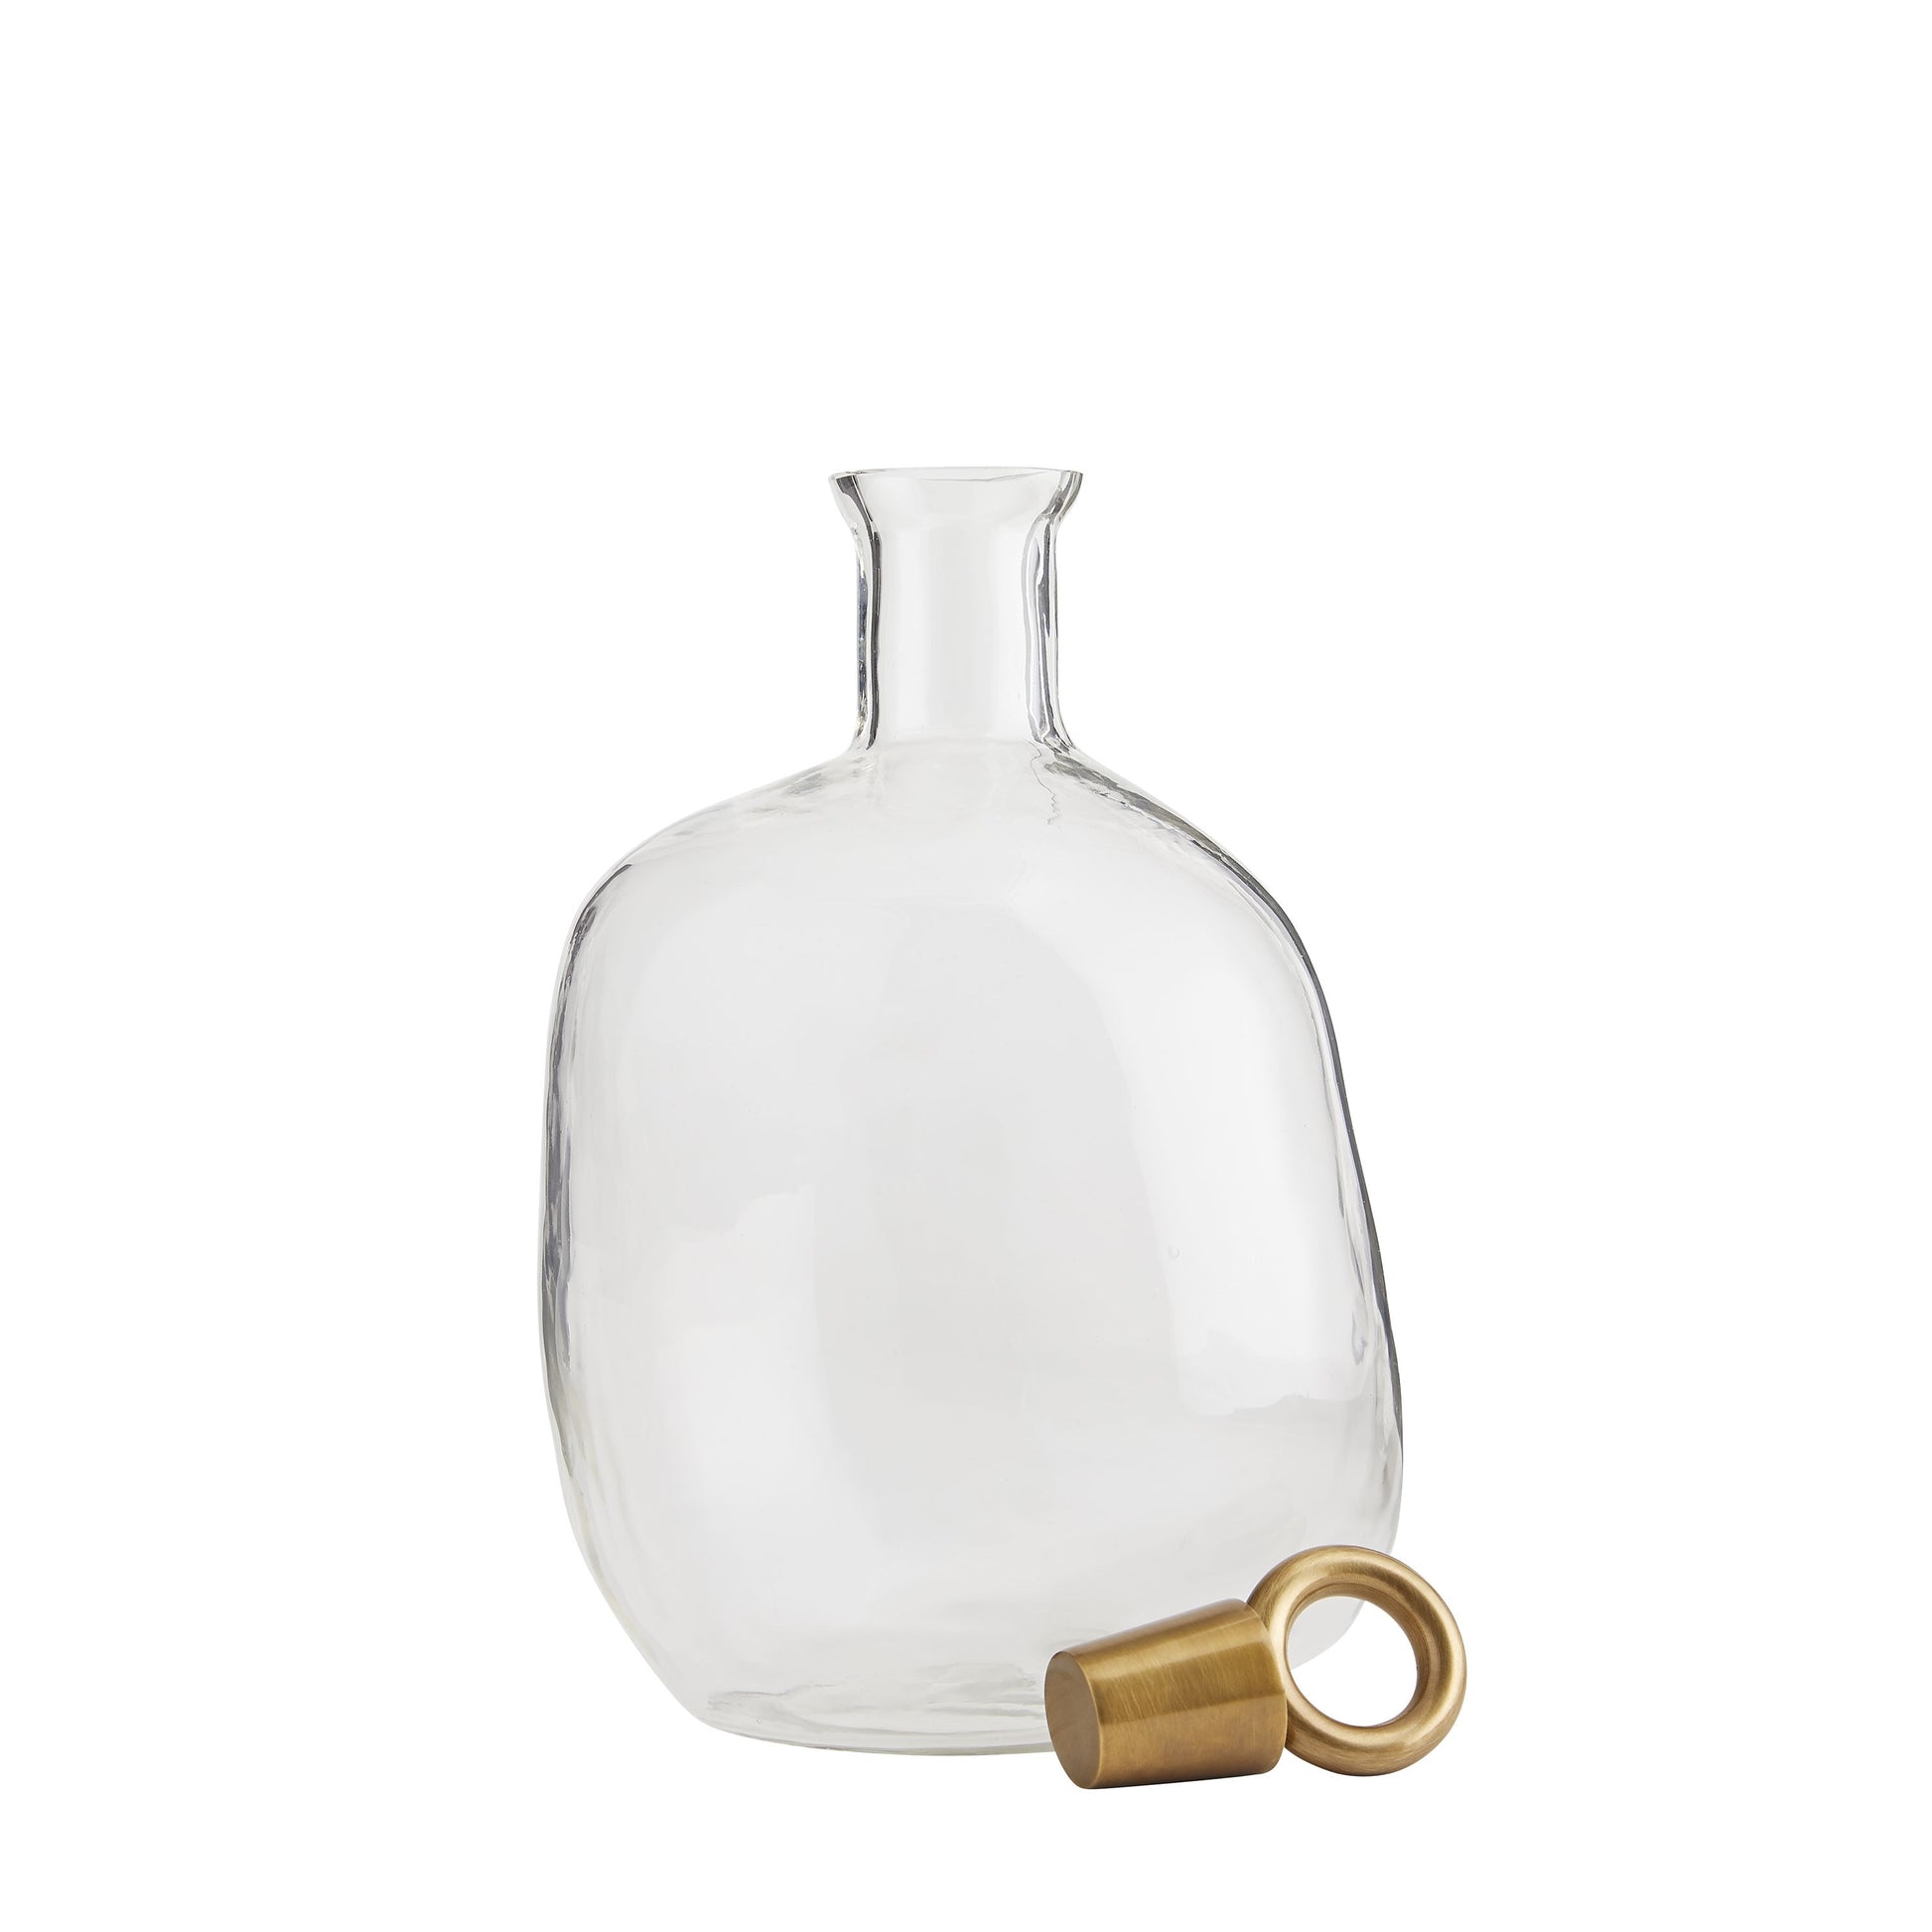 Arteriors Accessories X2622 Edgar Ring Stopper Decanter, Howell Furniture